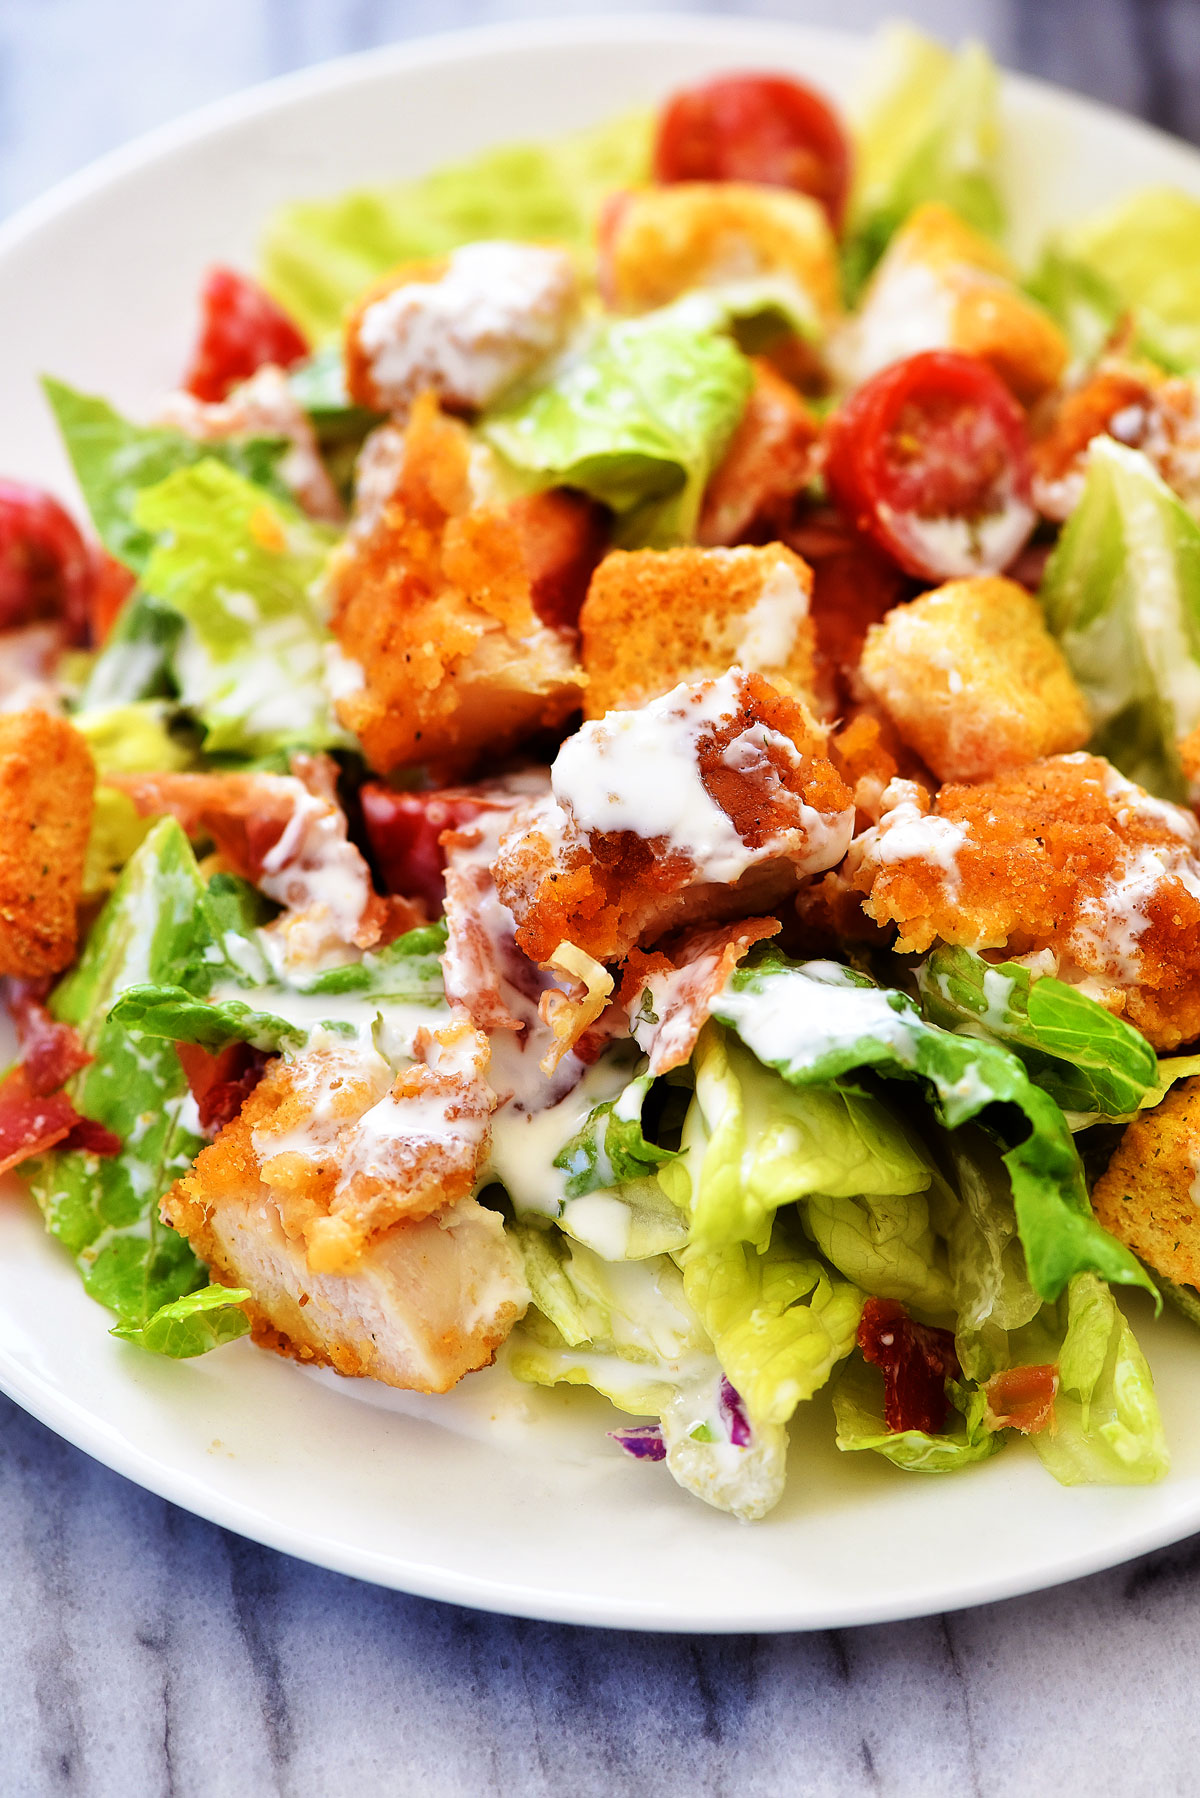 Crispy Chicken BLT Salad is loaded with chicken tenders, lots of chopped bacon, cherry tomatoes and croutons over a bed of romaine lettuce. Life-in-the-Lofthouse.com